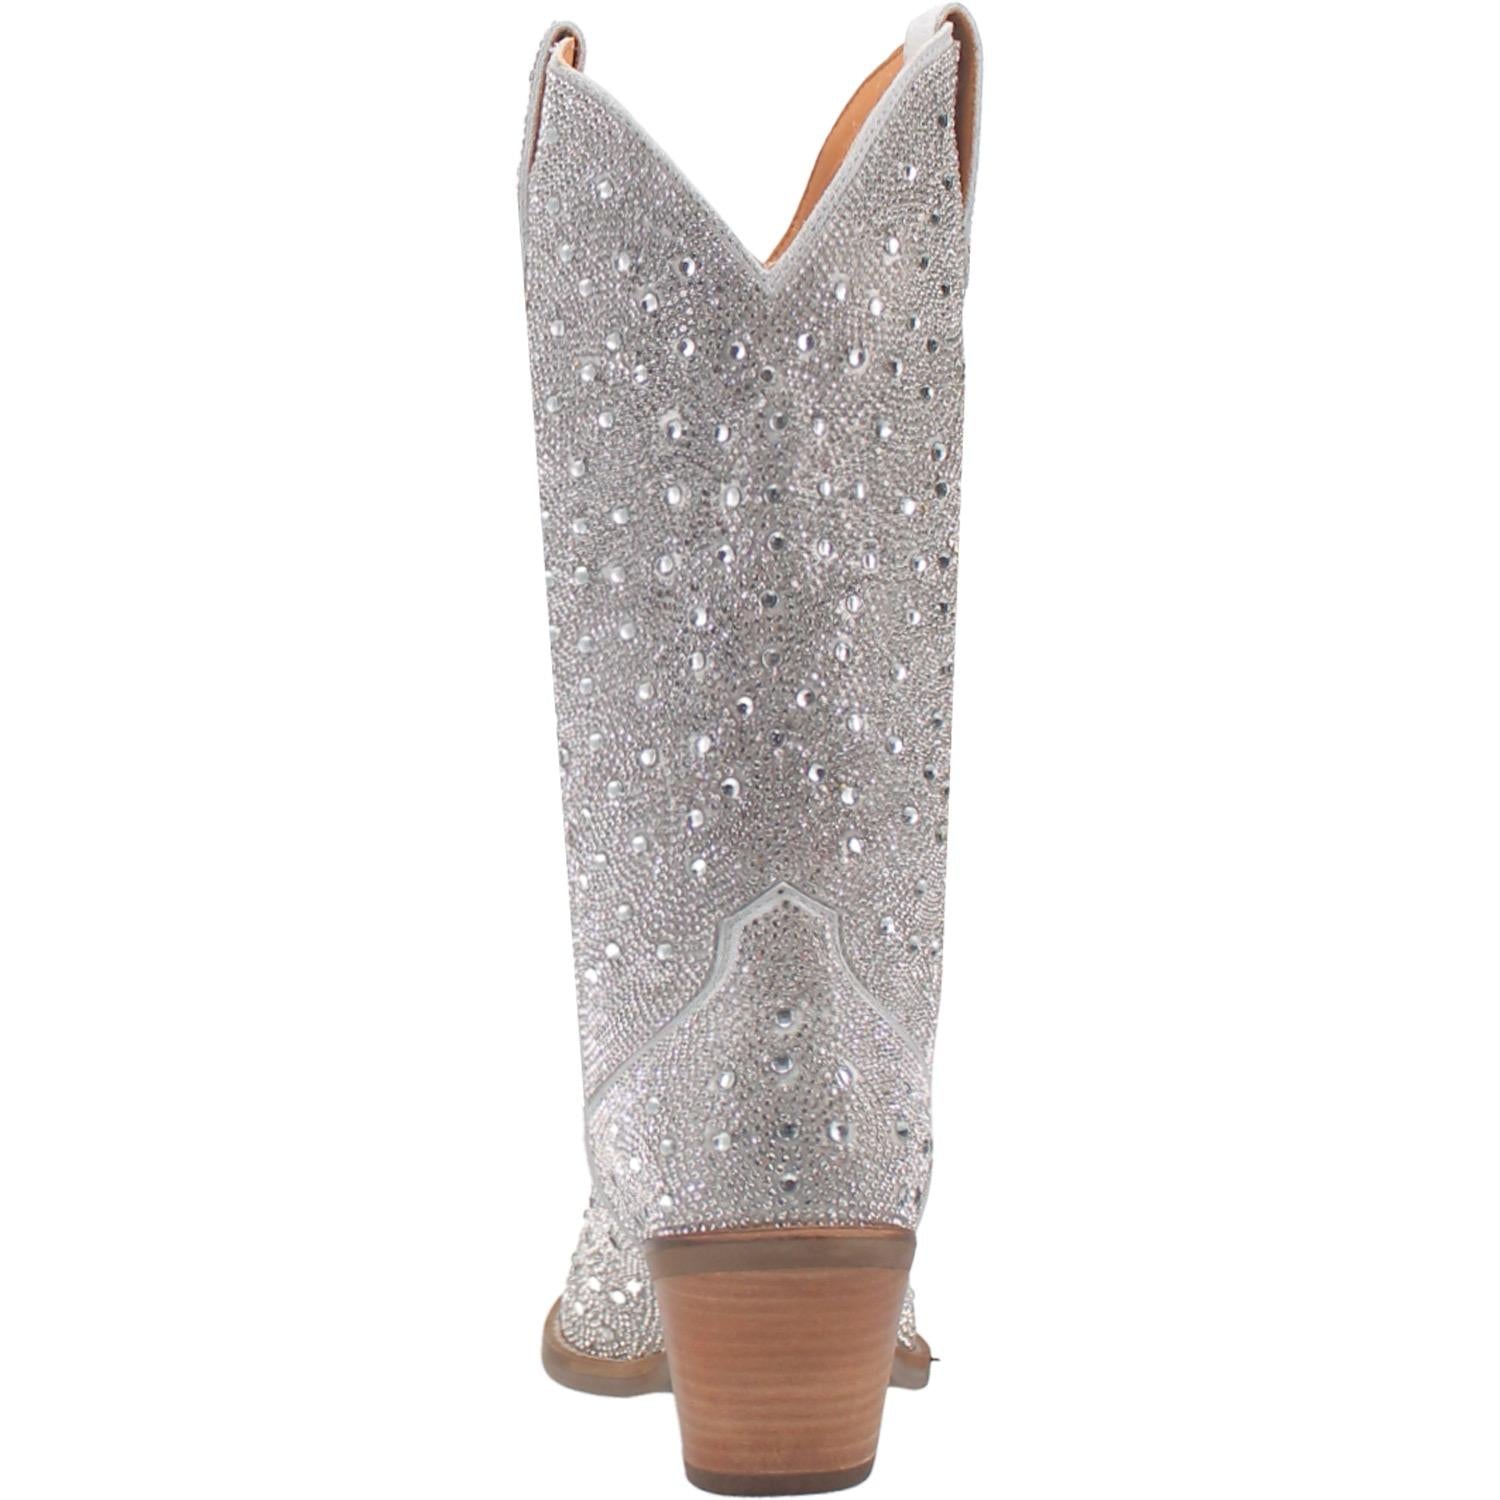 A mid calf length white boot with rhinestones from top to bottom, matching leather straps, a short heel, and a V cut at the top. Item is pictured on a white background